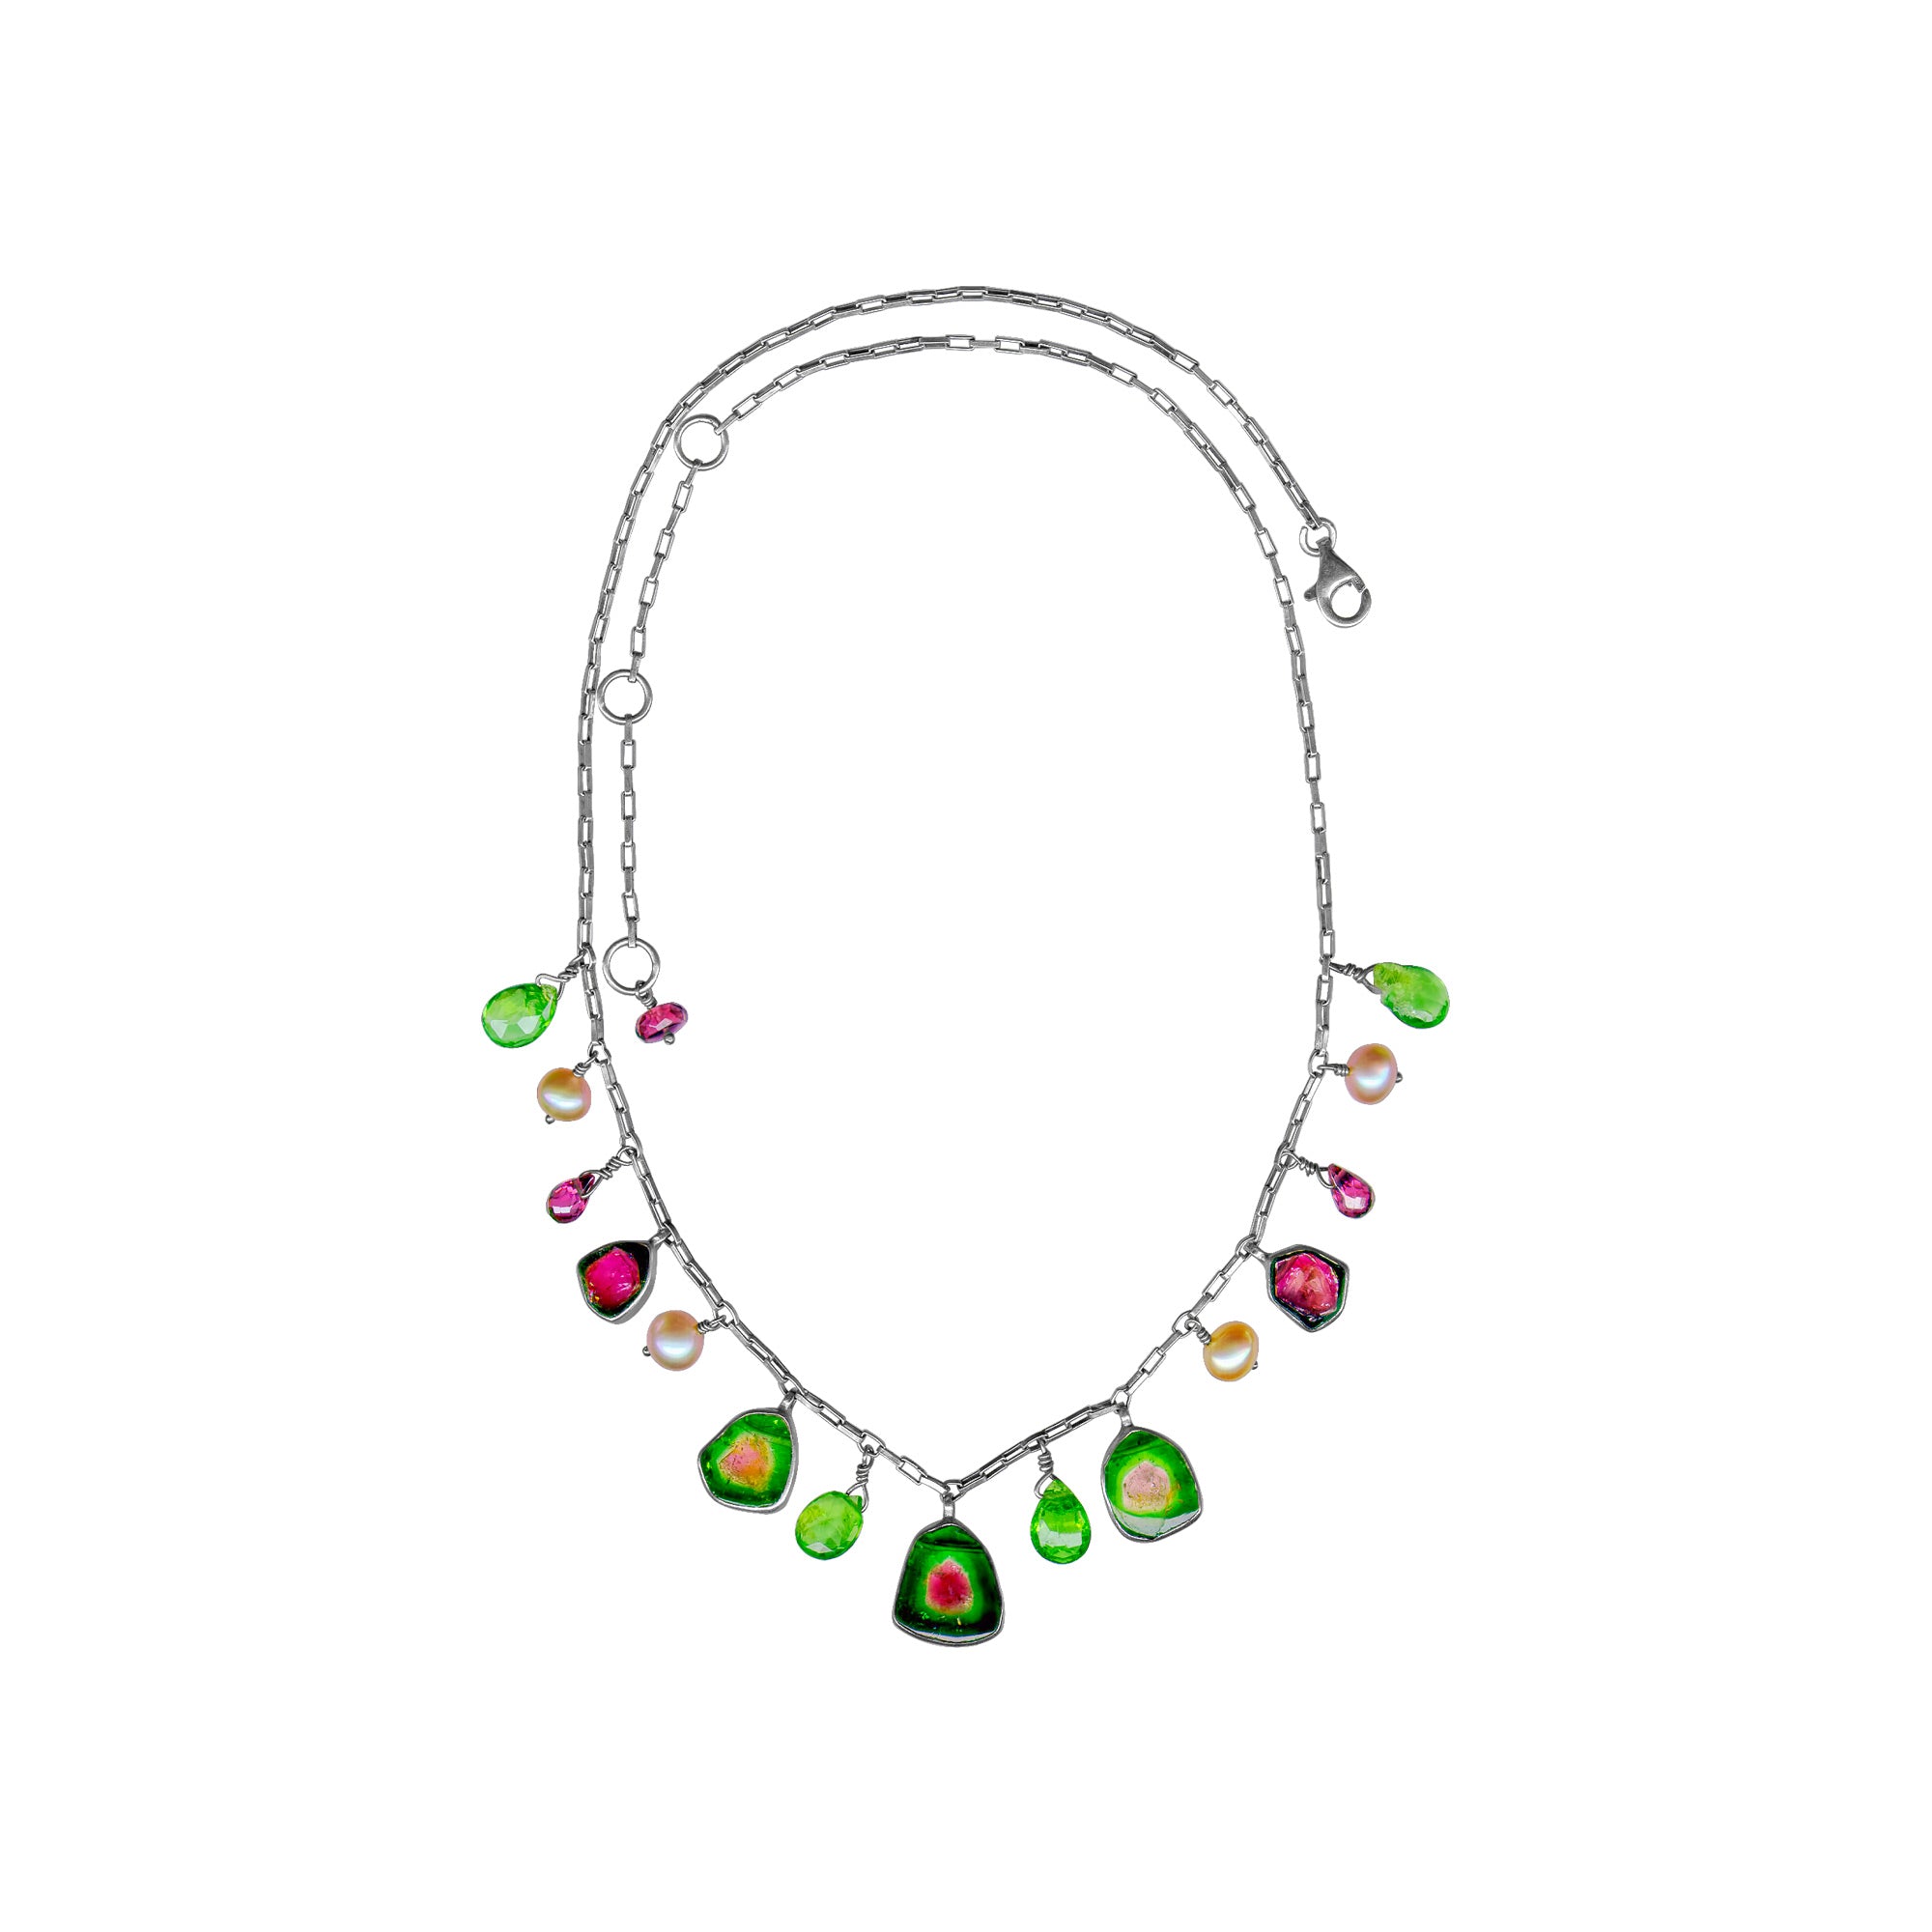 Sterling Silver Necklace Watermelon With Bead Pearls, Peridot, And Crystal On Chain